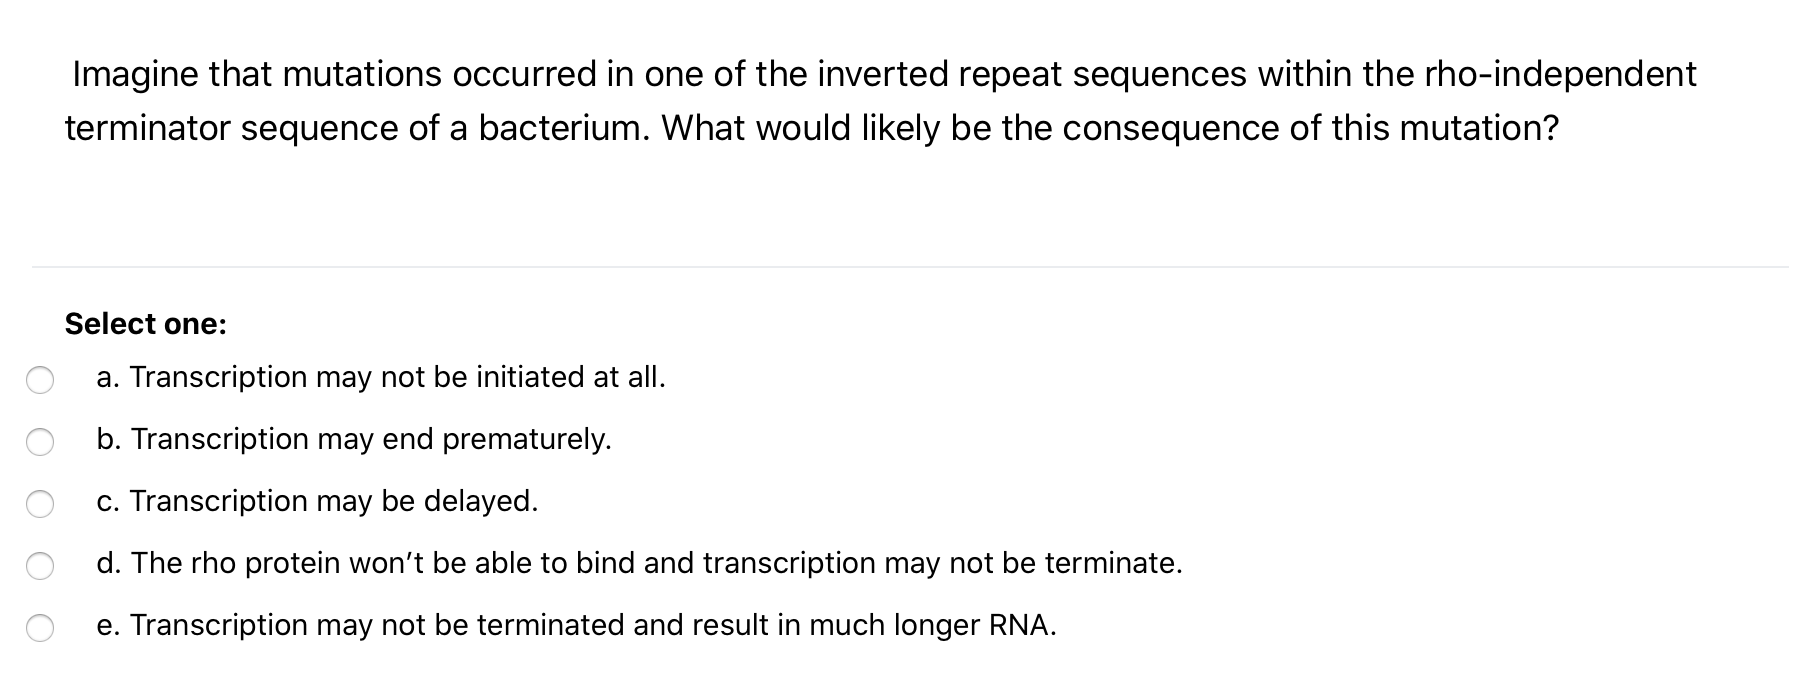 Imagine that mutations occurred in one of the inverted repeat sequences within the rho-independent
terminator sequence of a bacterium. What would likely be the consequence of this mutation?
Select one:
a. Transcription may not be initiated at all.
b. Transcription may end prematurely.
c. Transcription may be delayed.
d. The rho protein won't be able to bind and transcription may not be terminate.
e. Transcription may not be terminated and result in much longer RNA.
